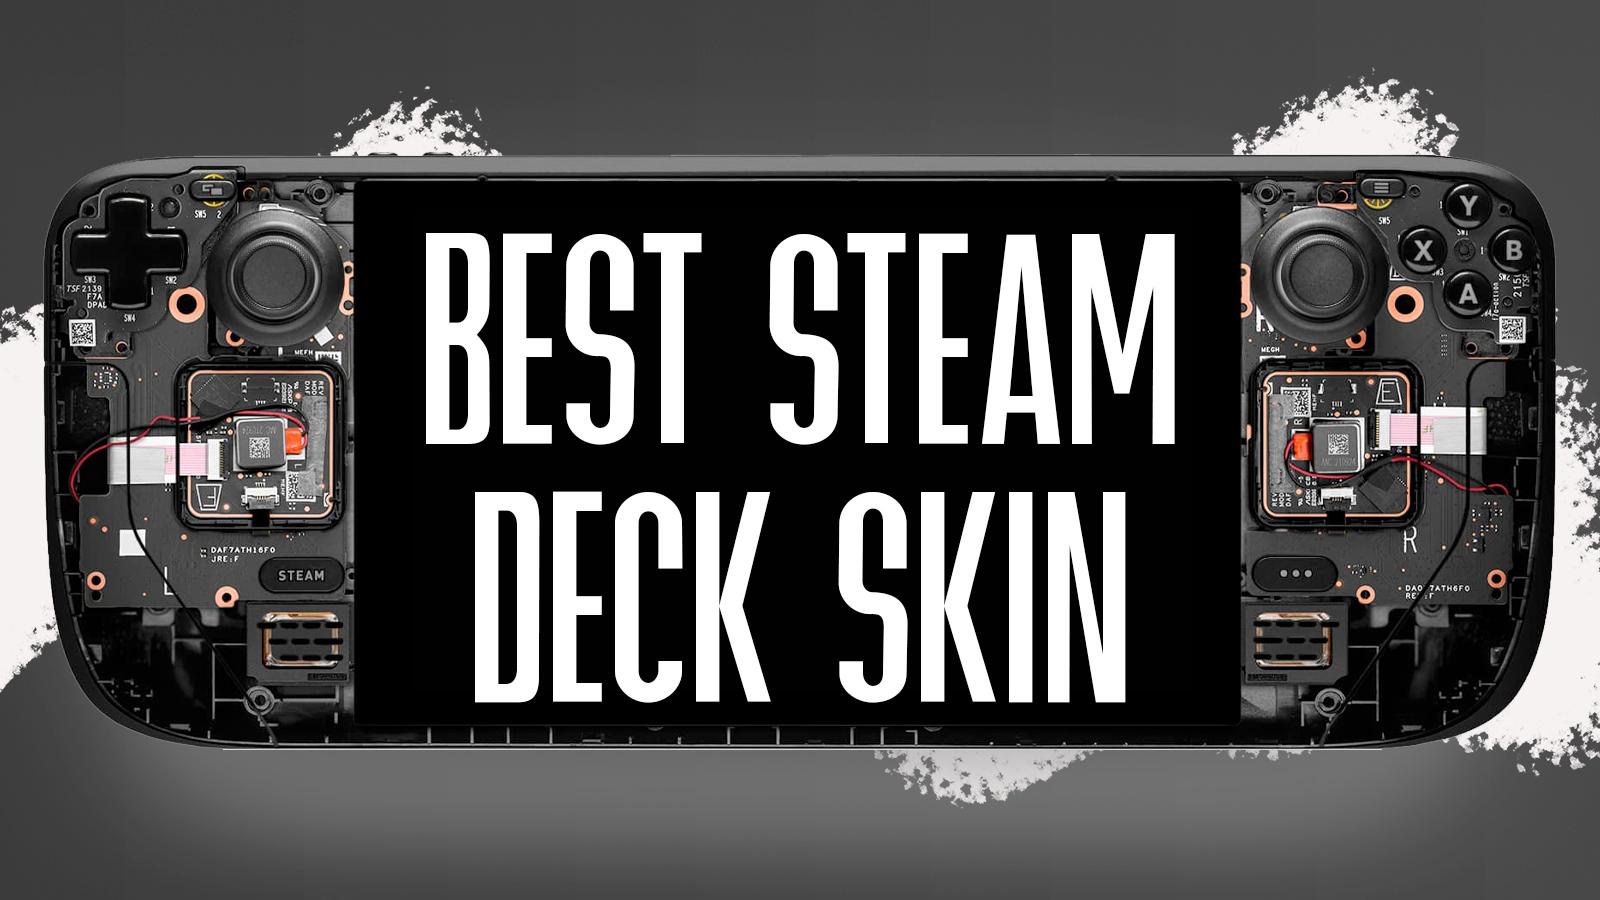 dbrand brings you skins or skins to modify your Steam Deck